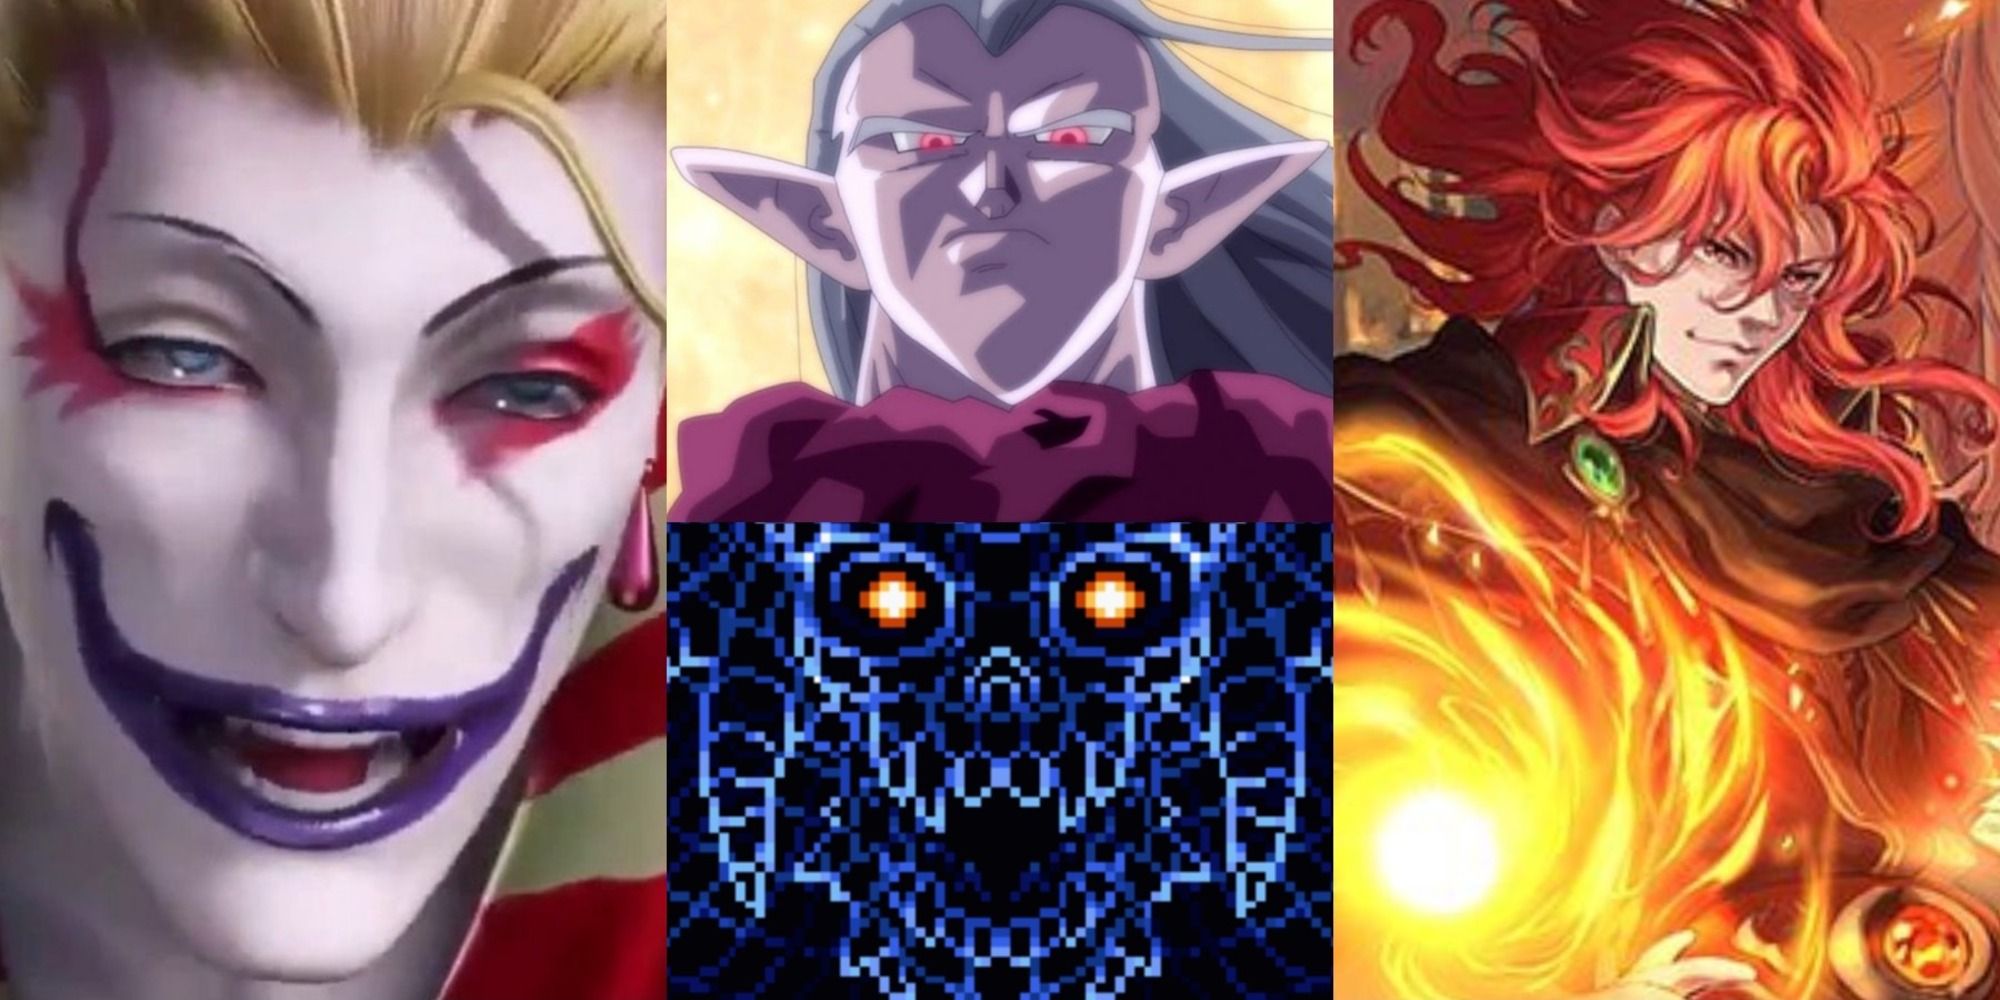 Cover photo of Final Fantasy Kefka, Chrono Trigger Magus, Live A Live 0D-10 Odio, and Fire Emblem Arvis SNES villains